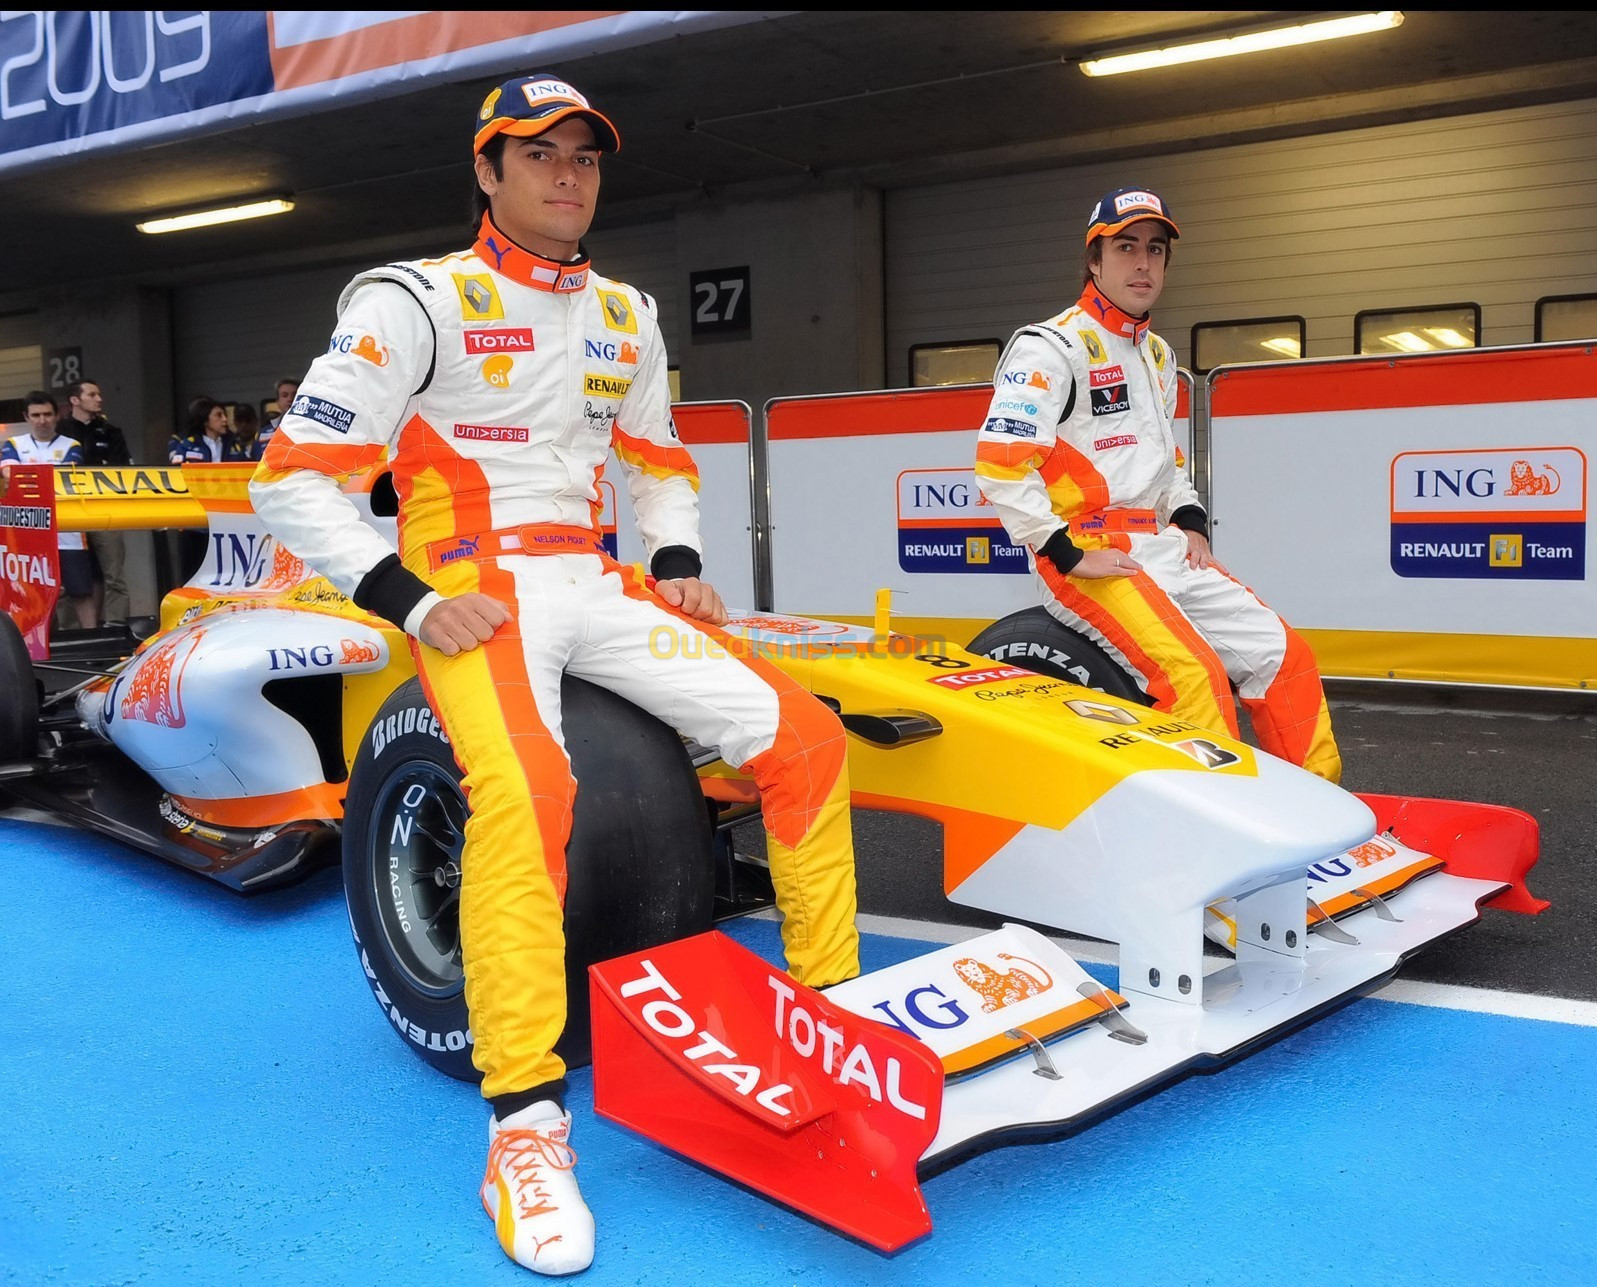 CASQUETTE F1 ING ALONSO